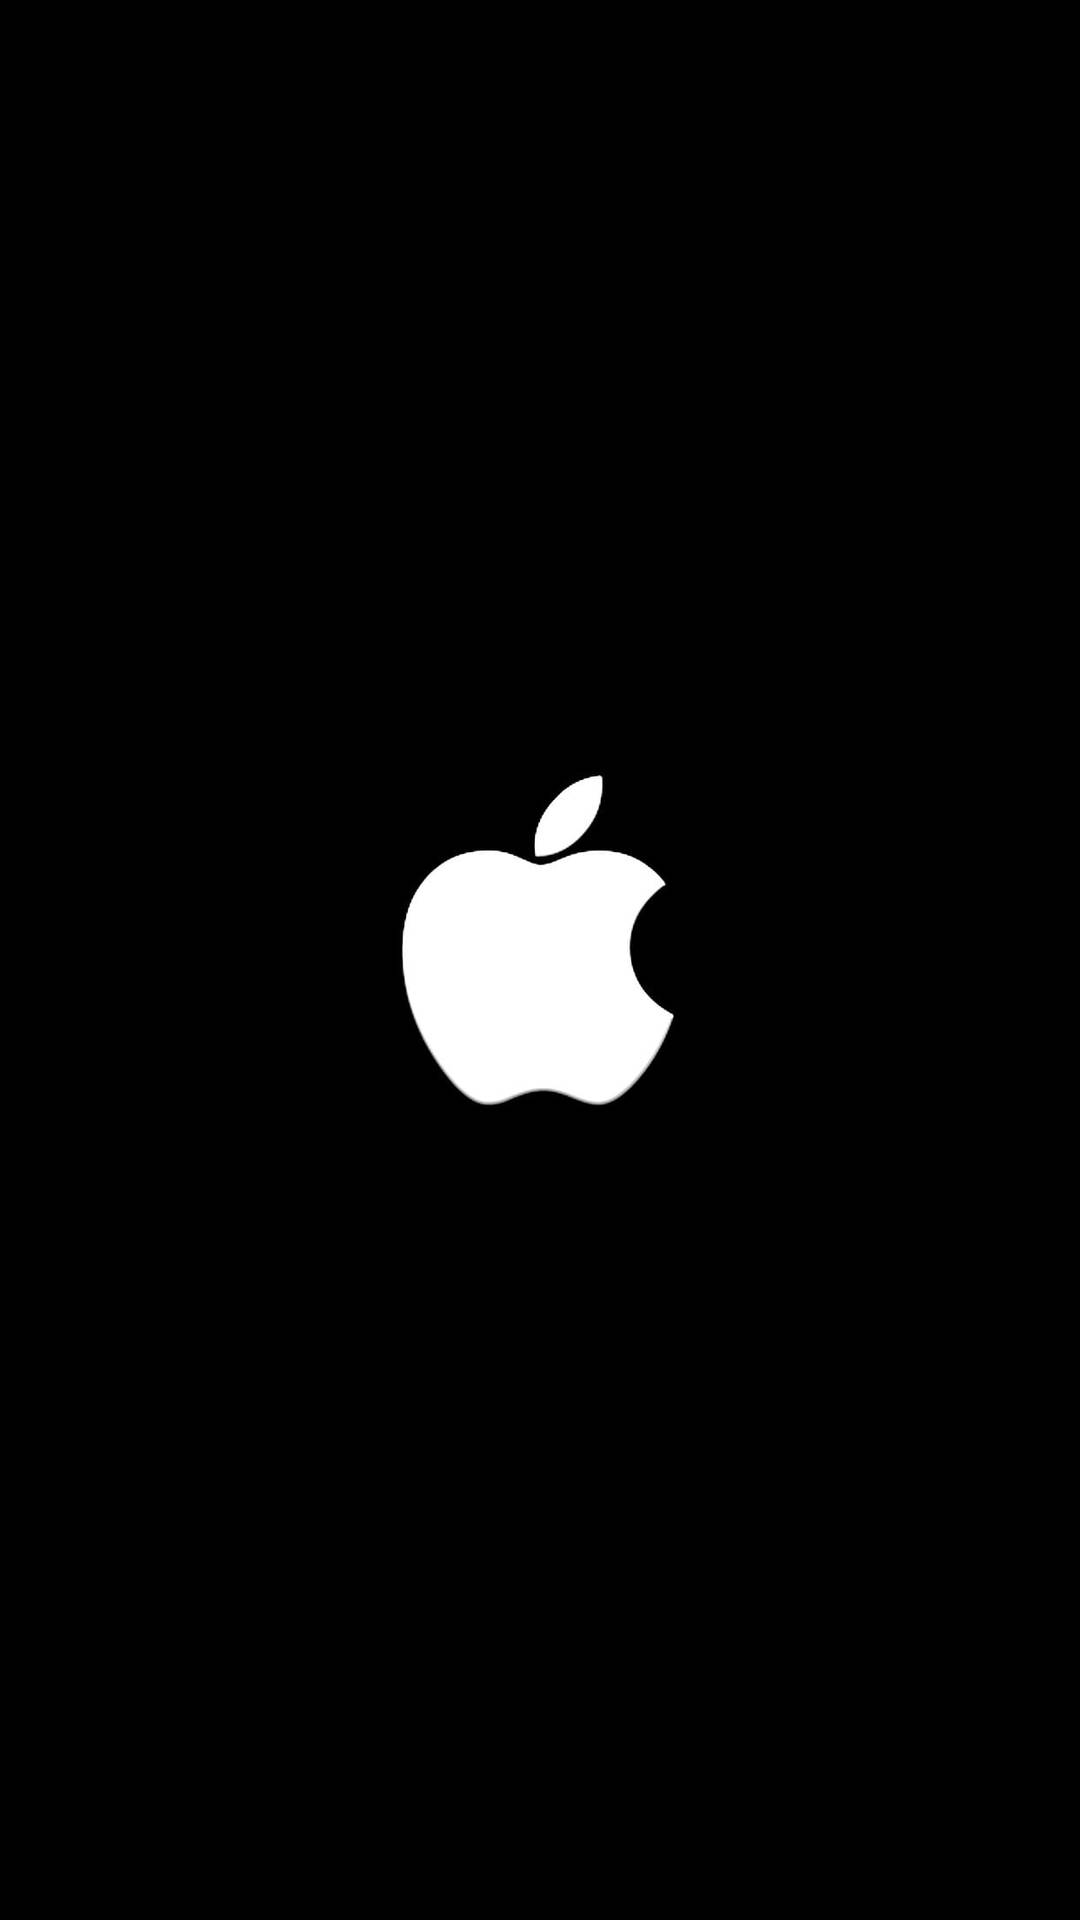 Full Hd White Apple On Black Picture